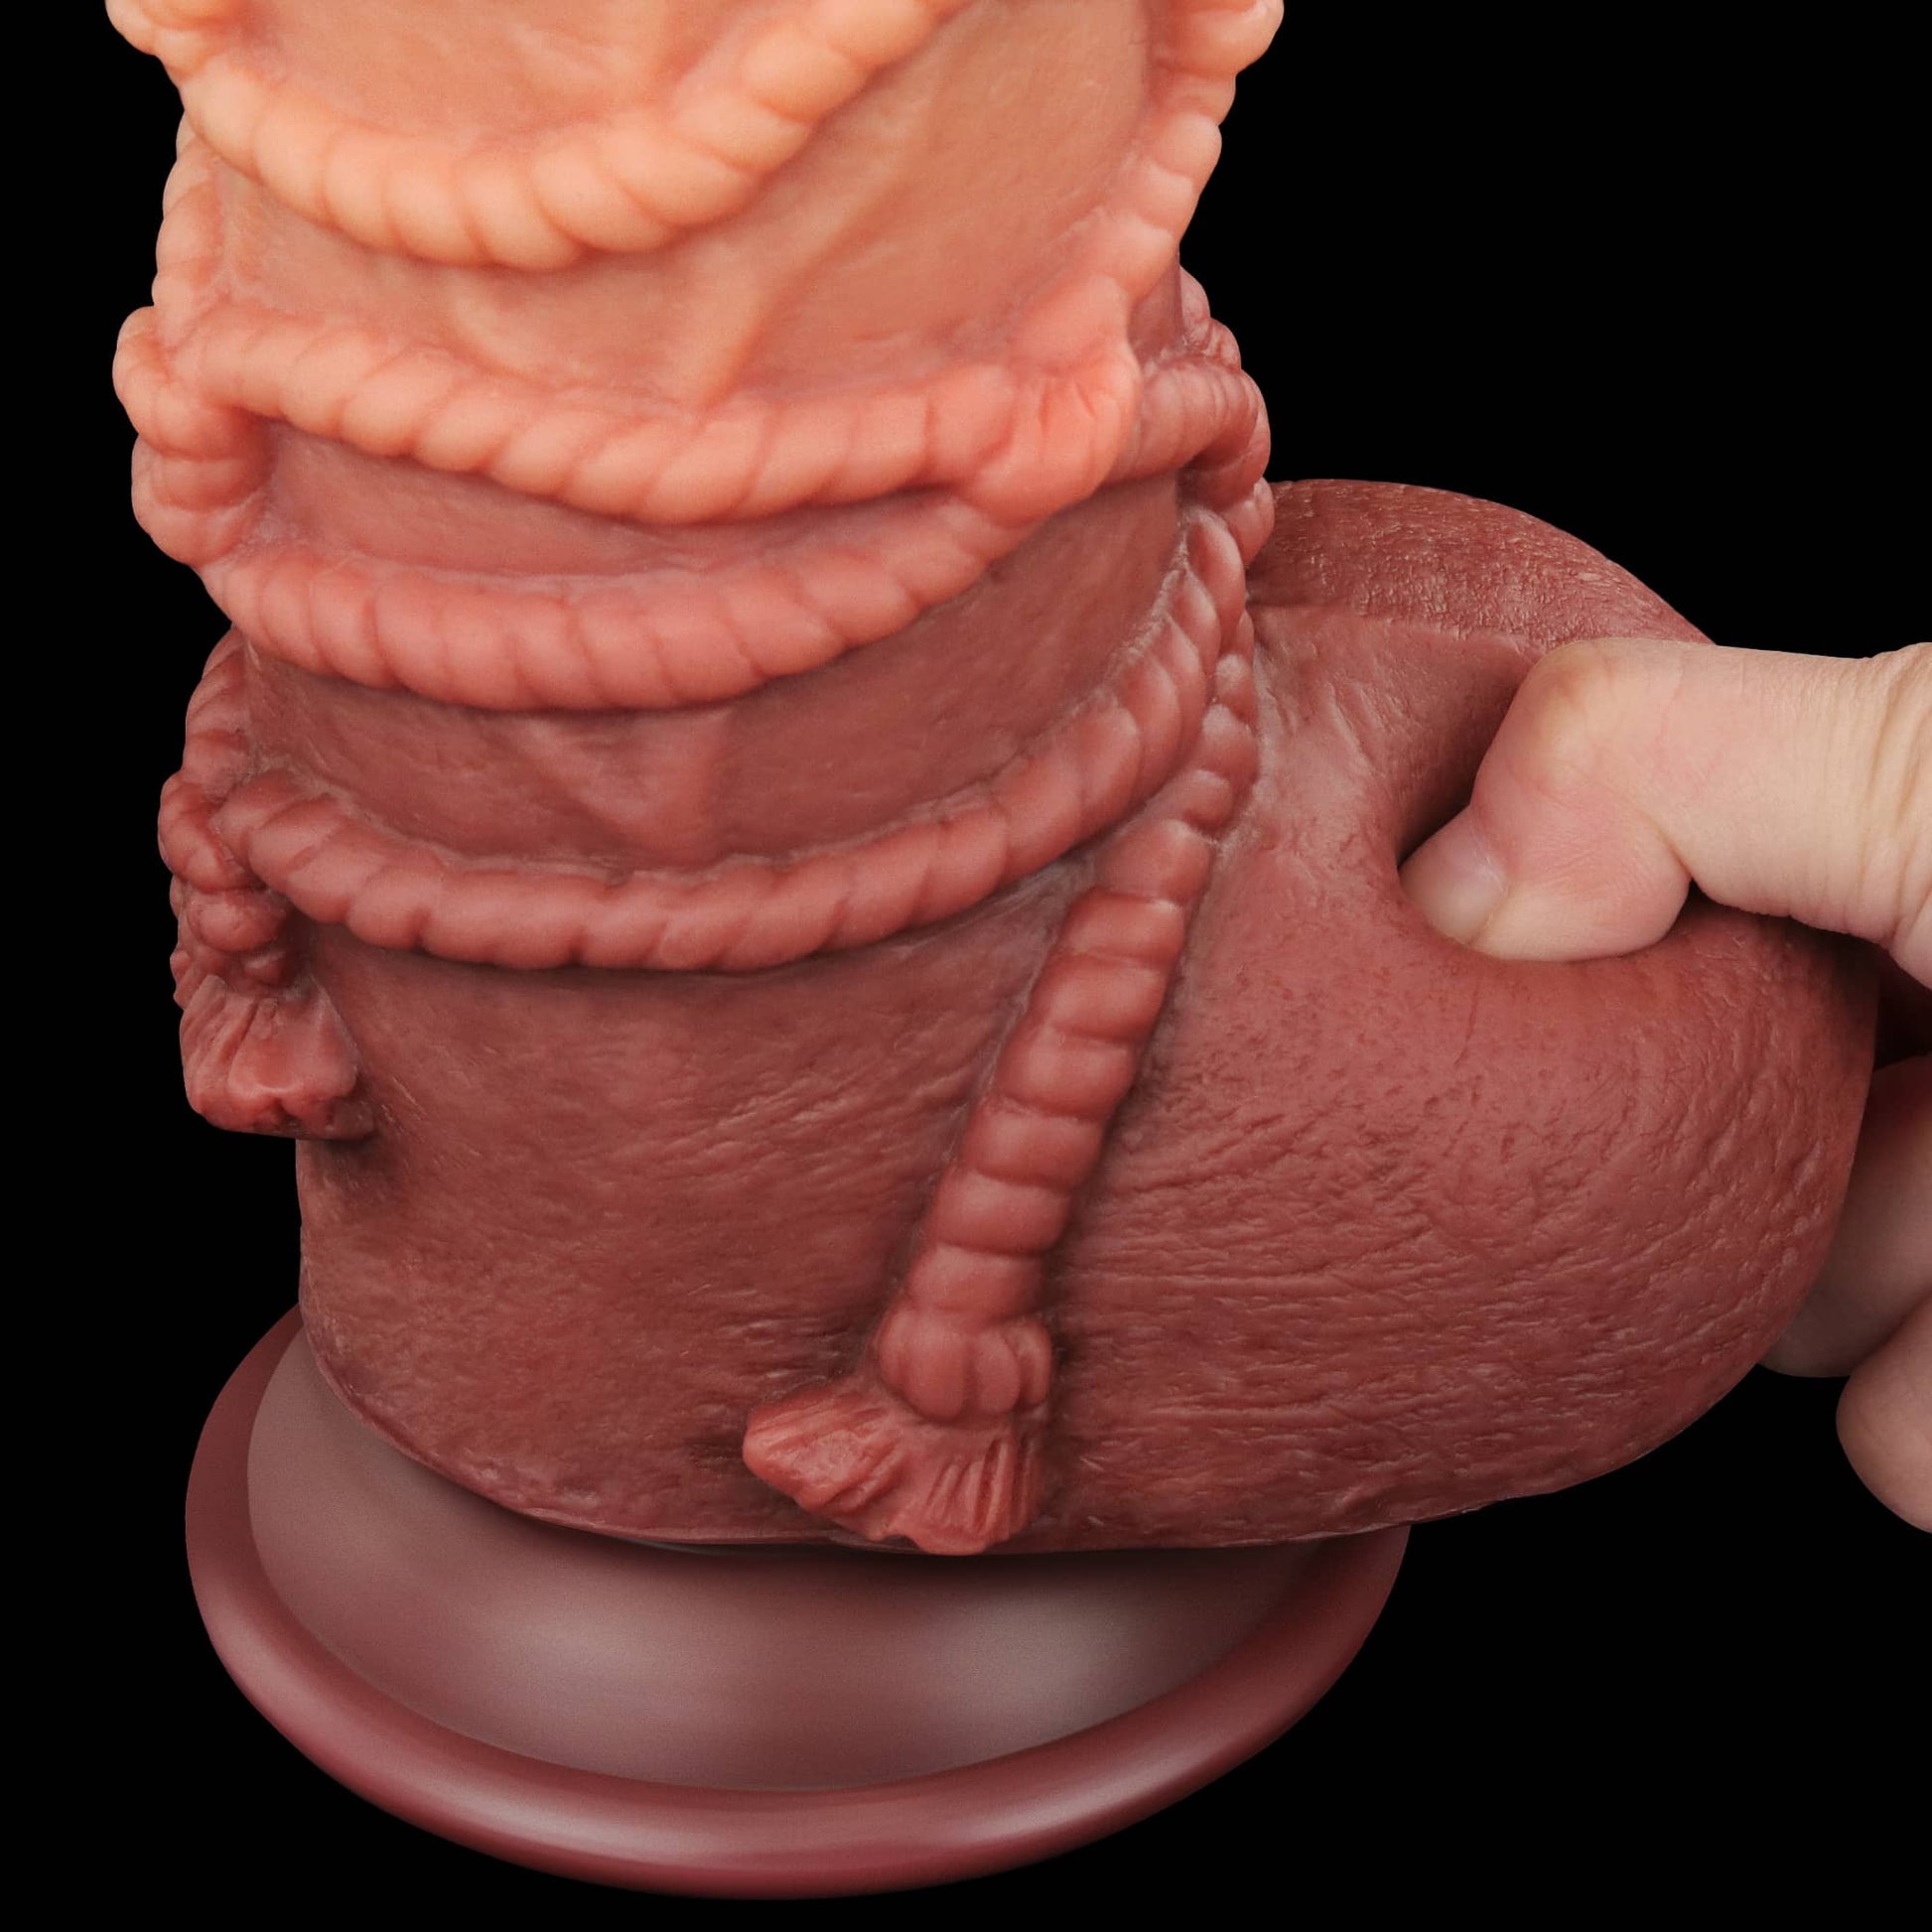 The soft testicle of the 9.5 inches silicone realistic rope dildo